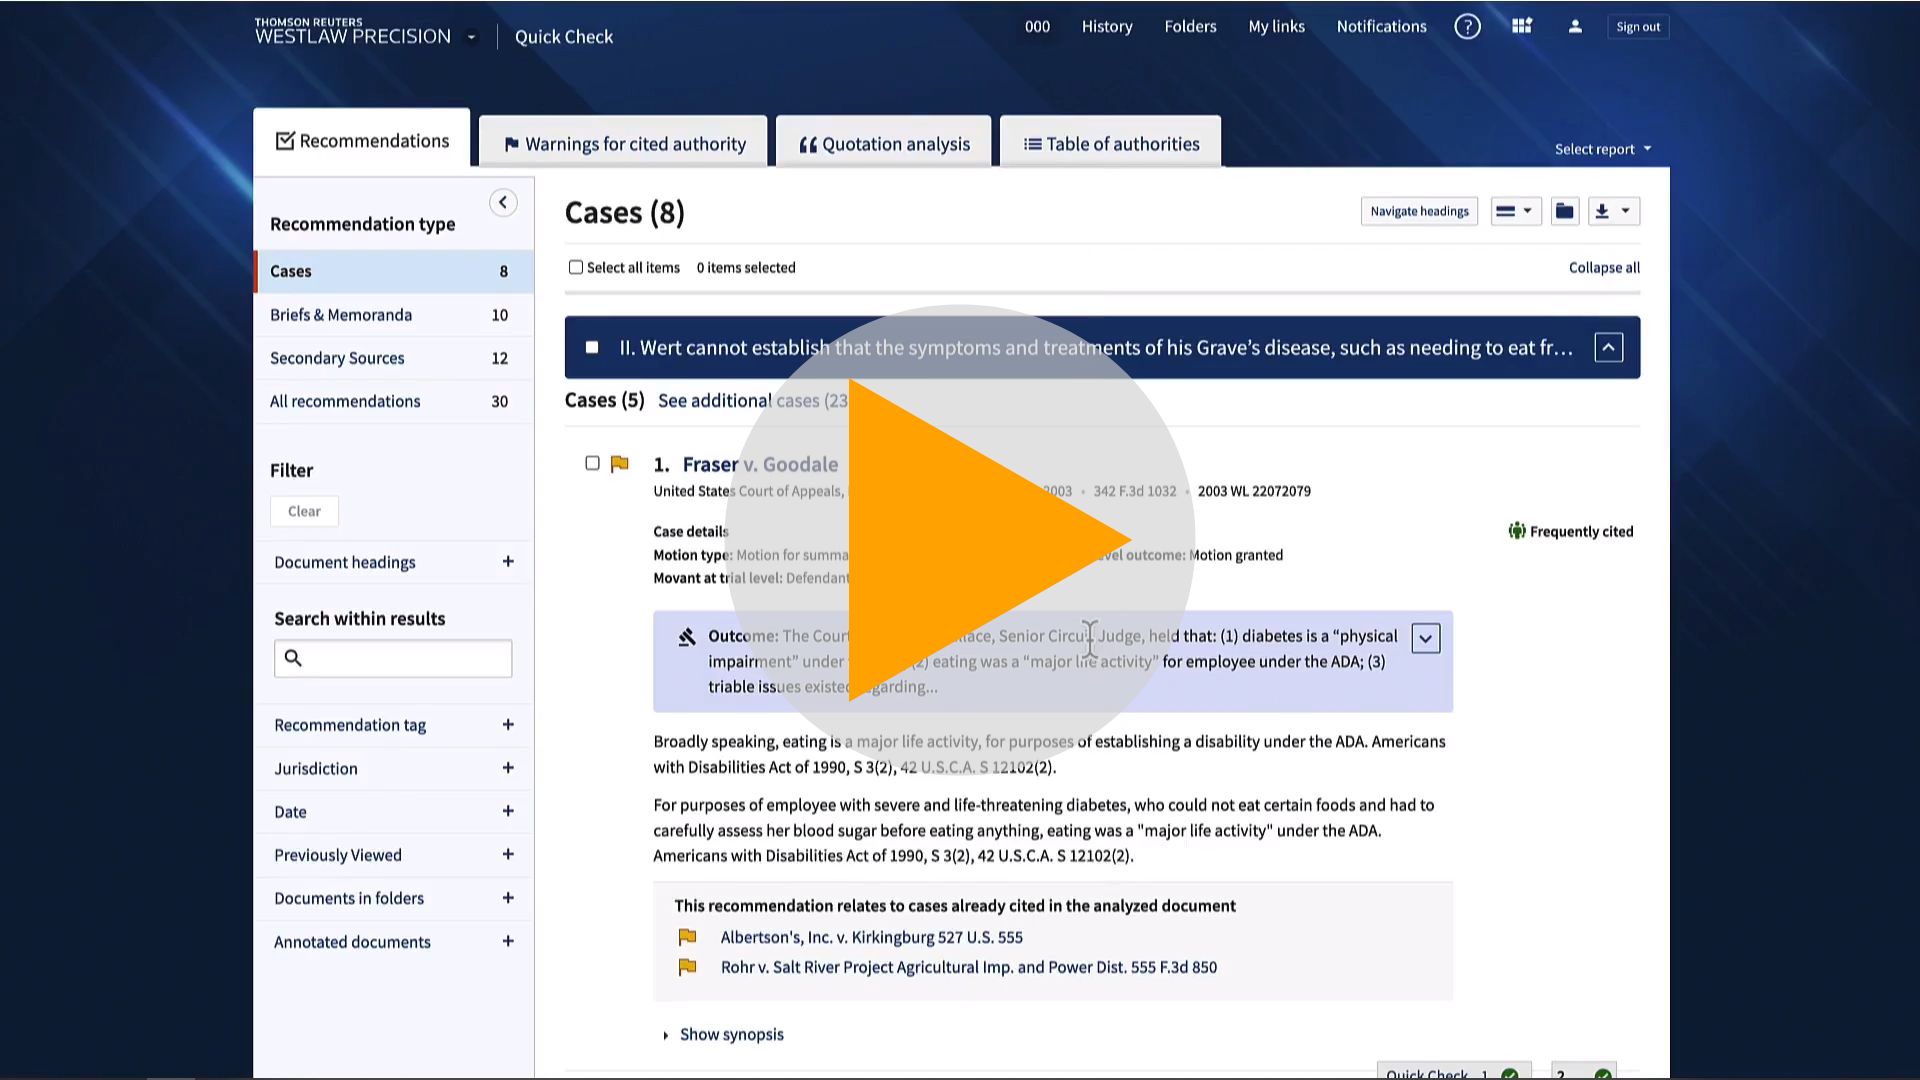 Video lesson on Quick Check and other Westlaw tools